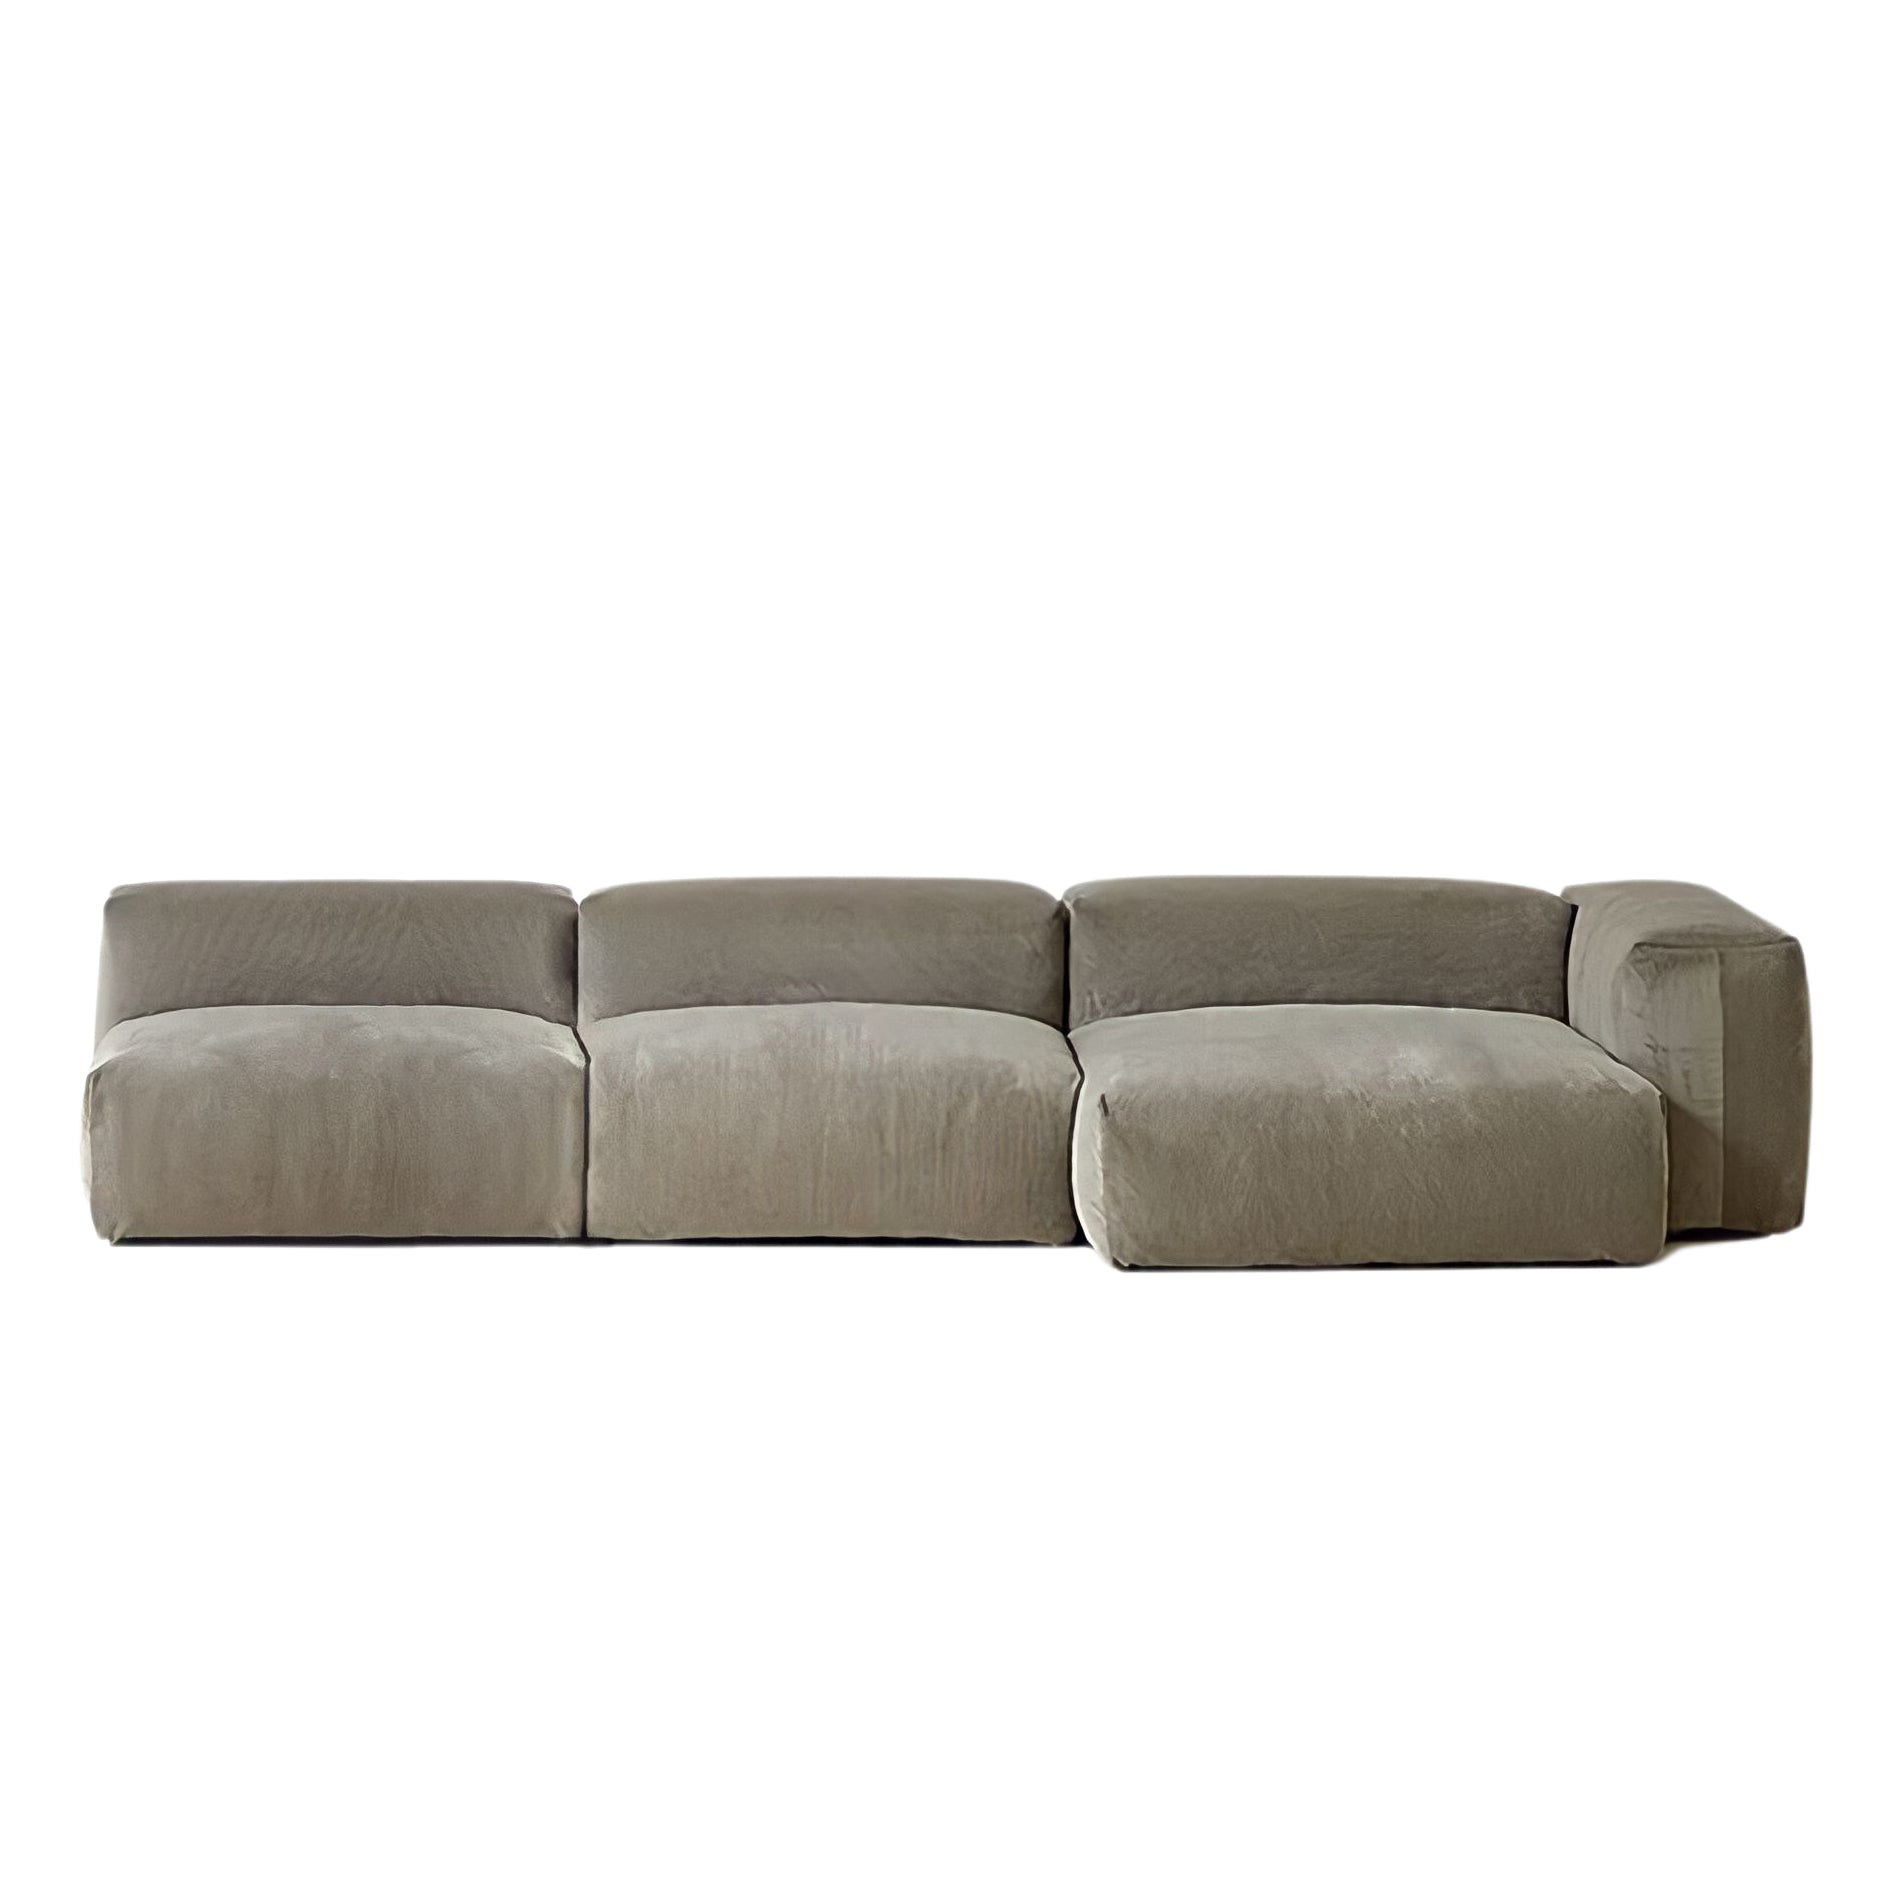 The Squish Sectional